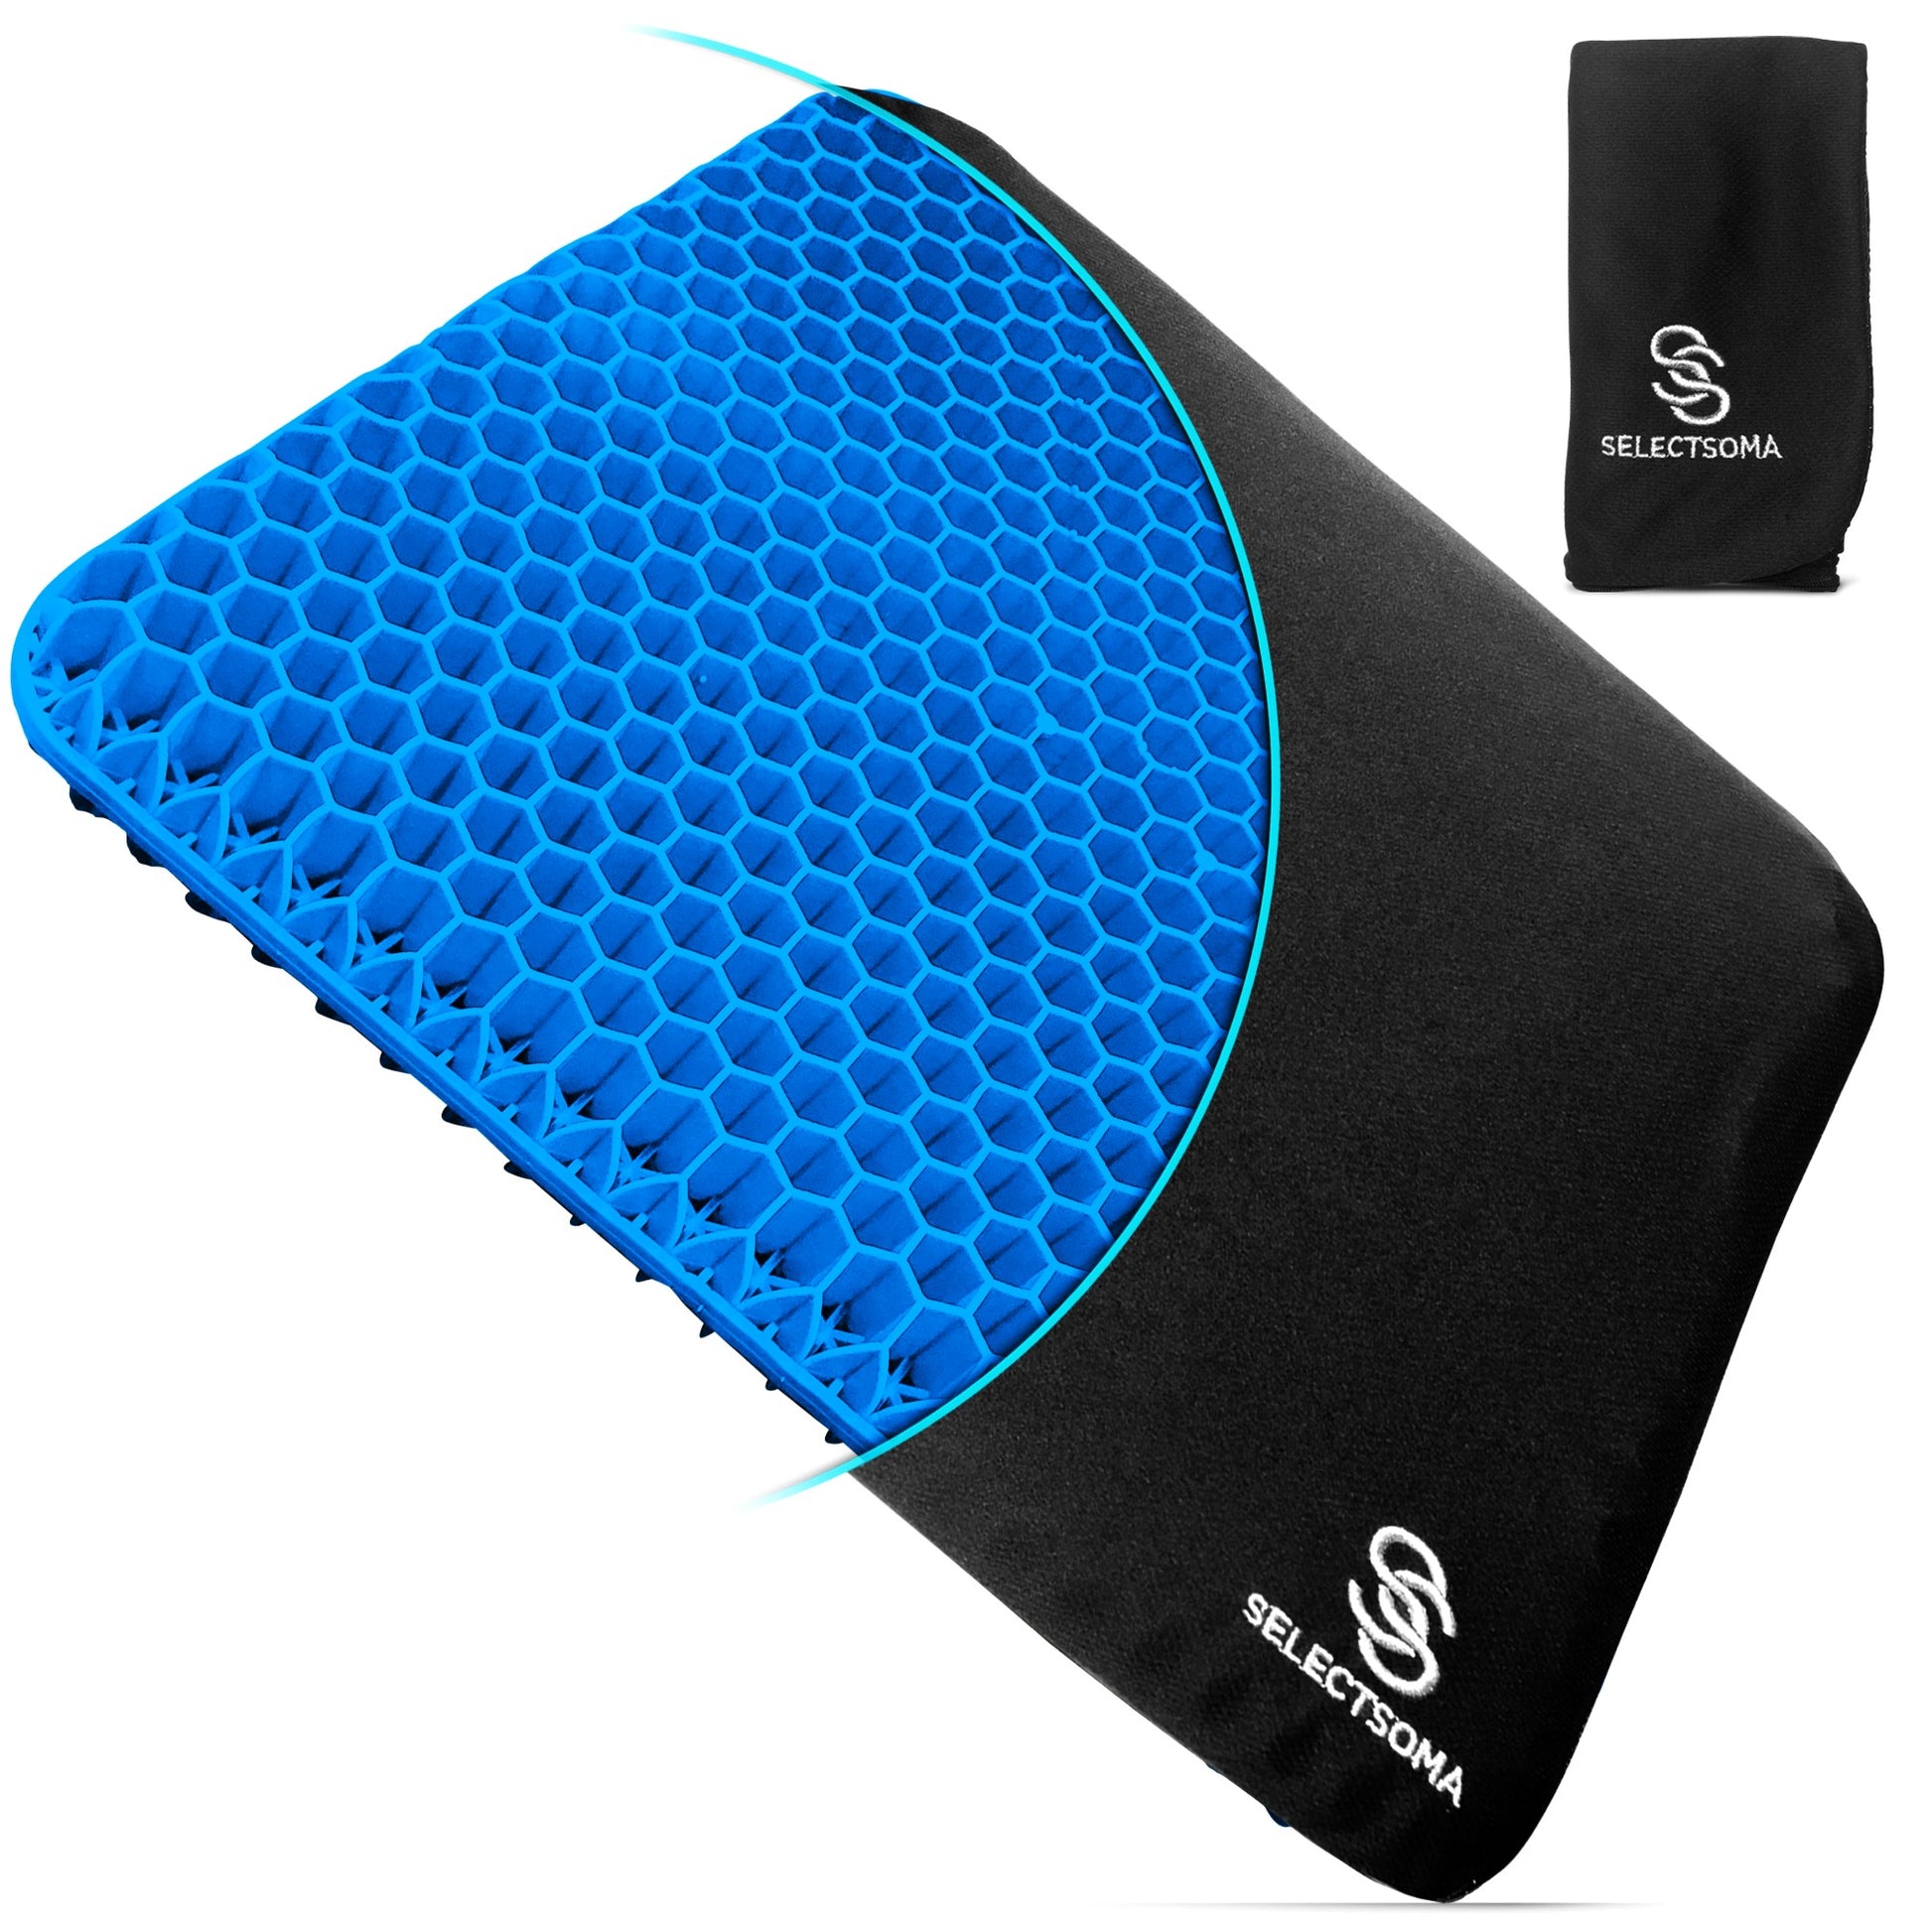 Fencesmart Gel Seat Cushion, Helps with Long Sitting Back Pain